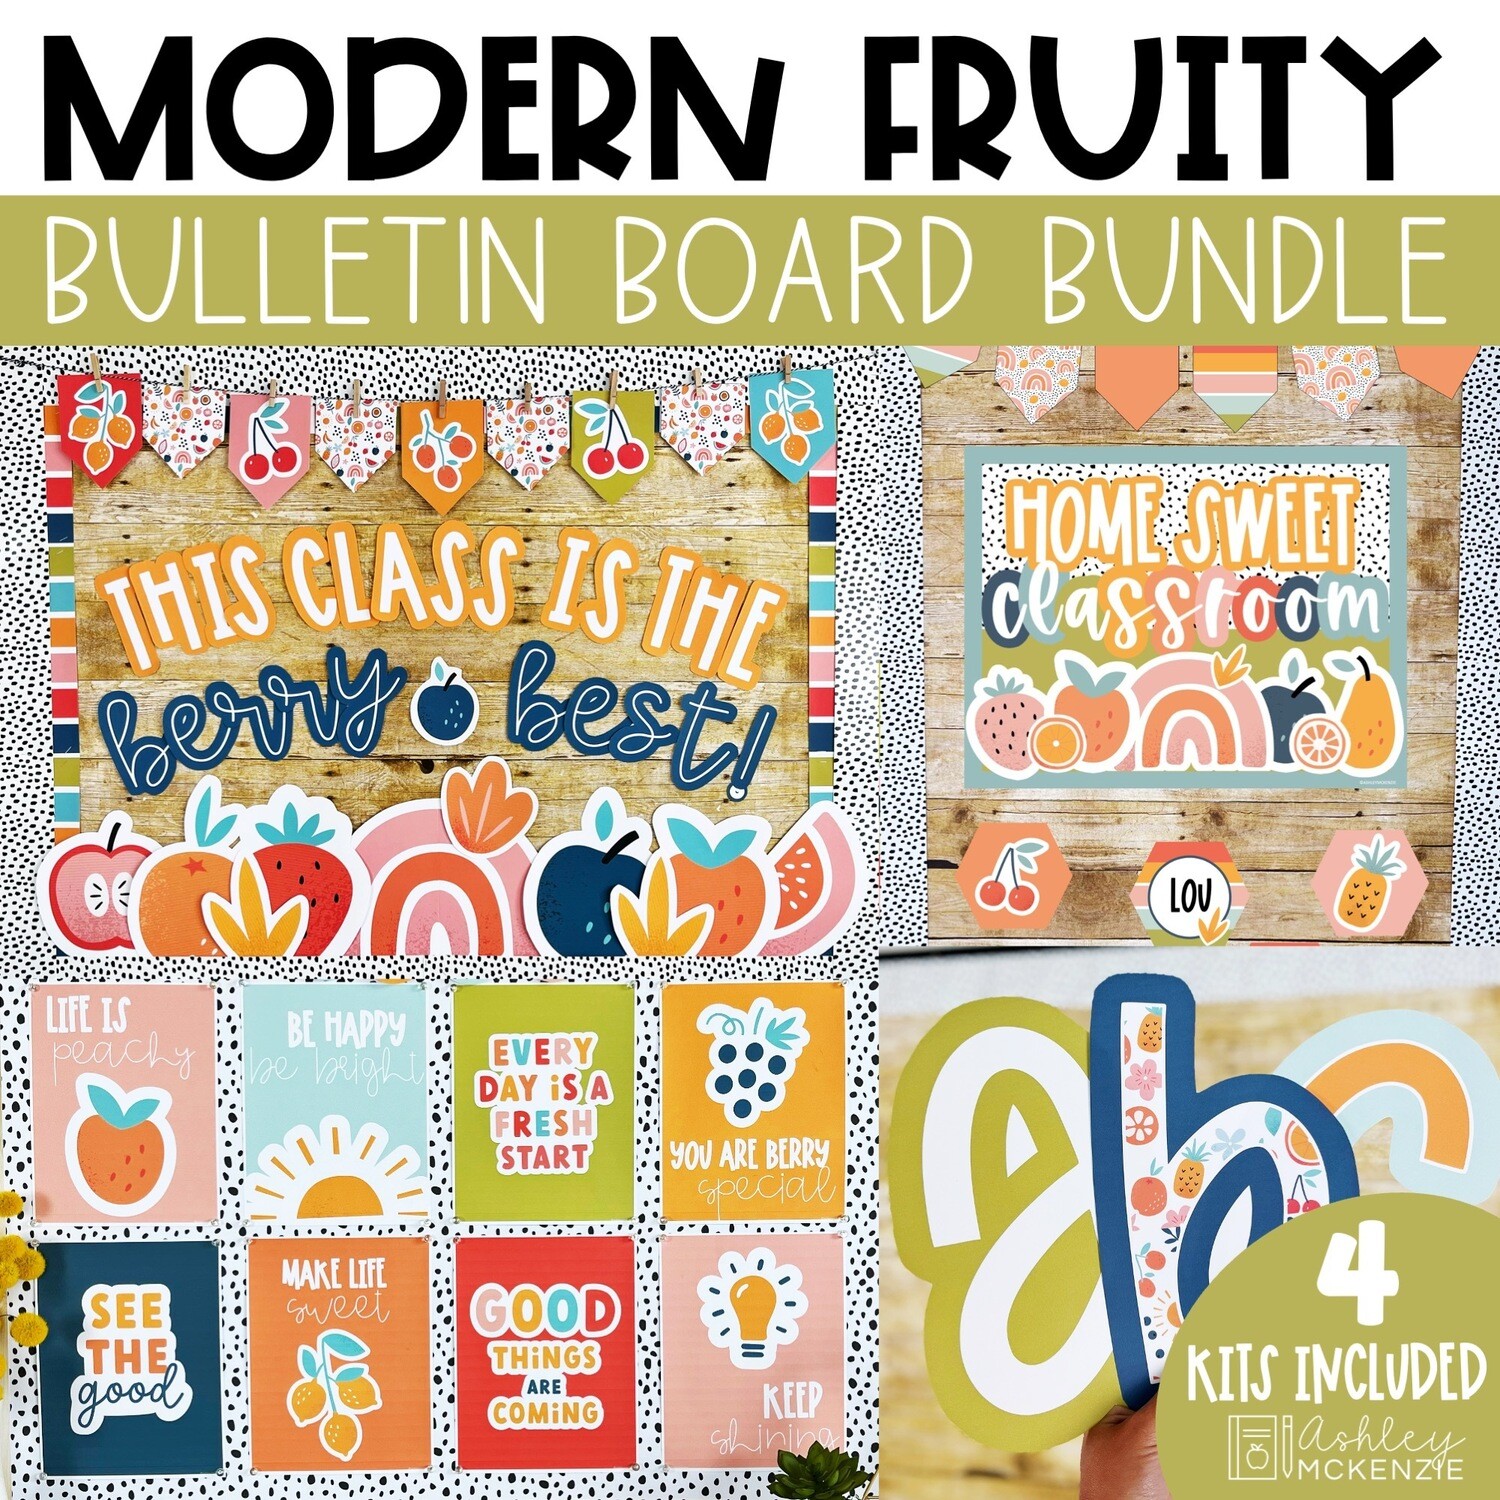 Bulletin Board Letters (Printable): Blue and Orange